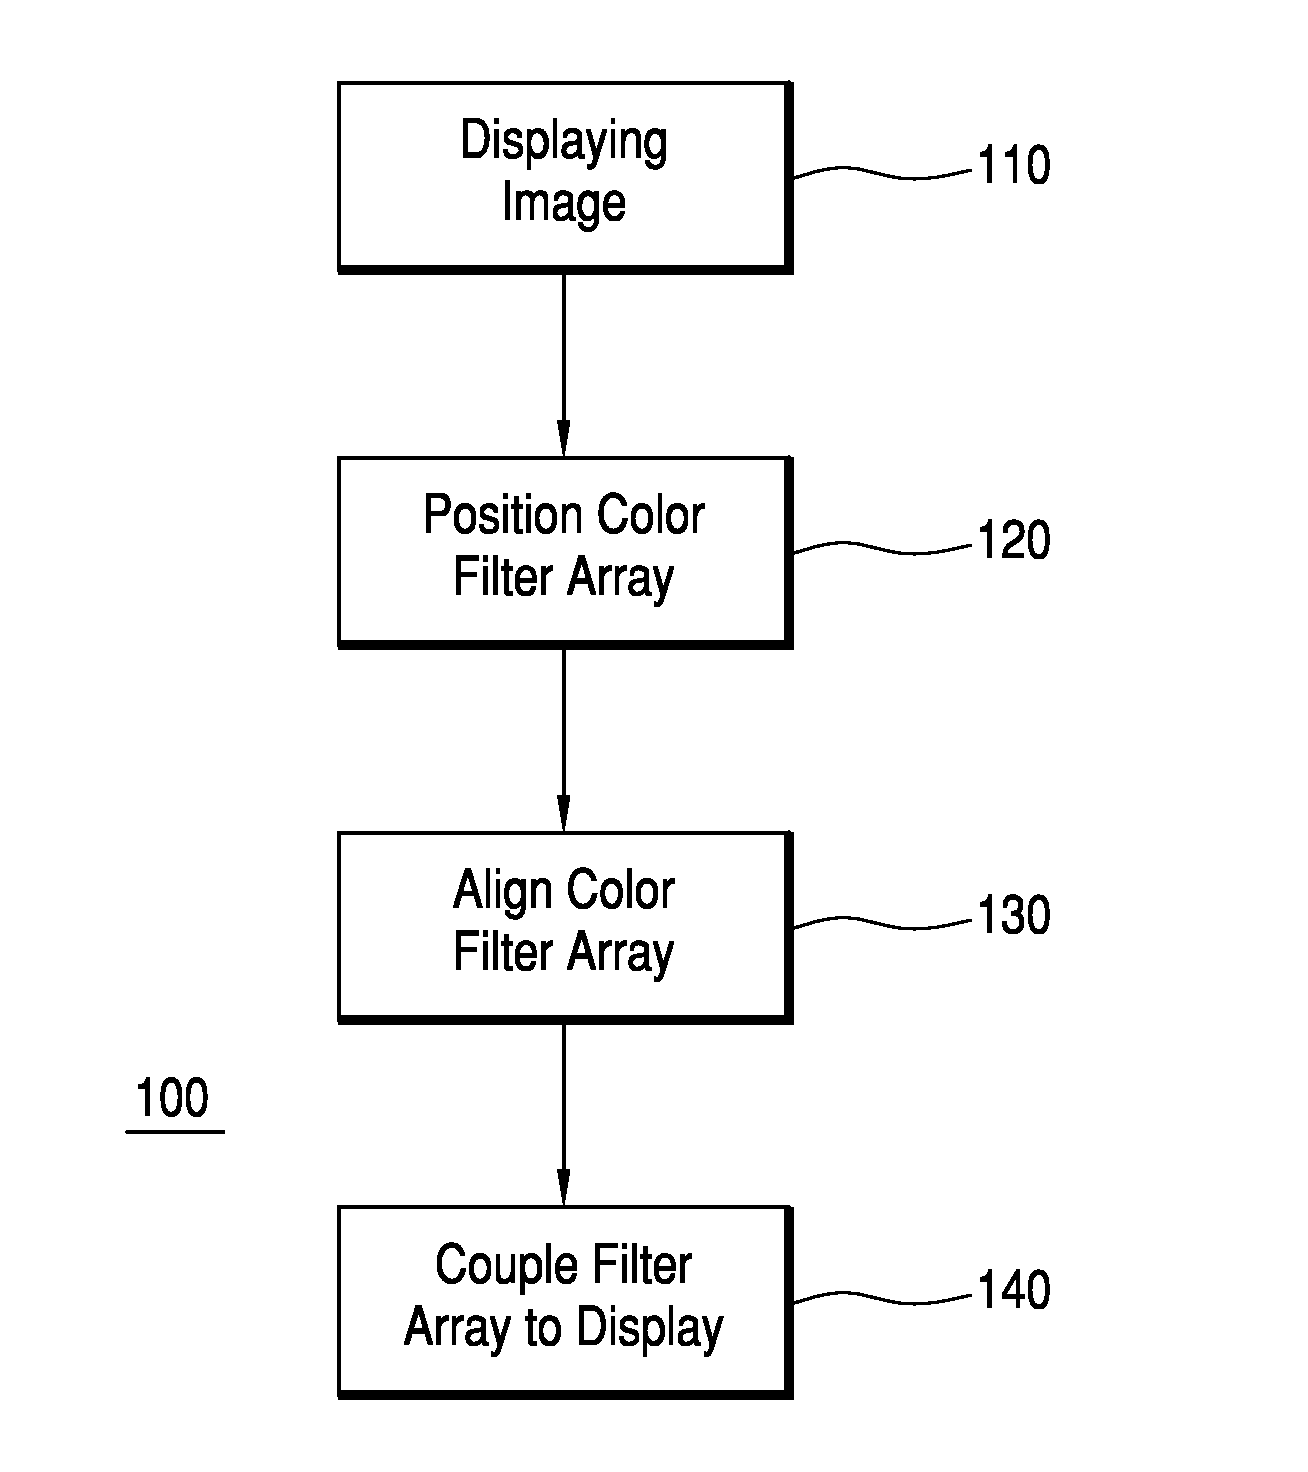 Method and System for Aligning Color Filter Array